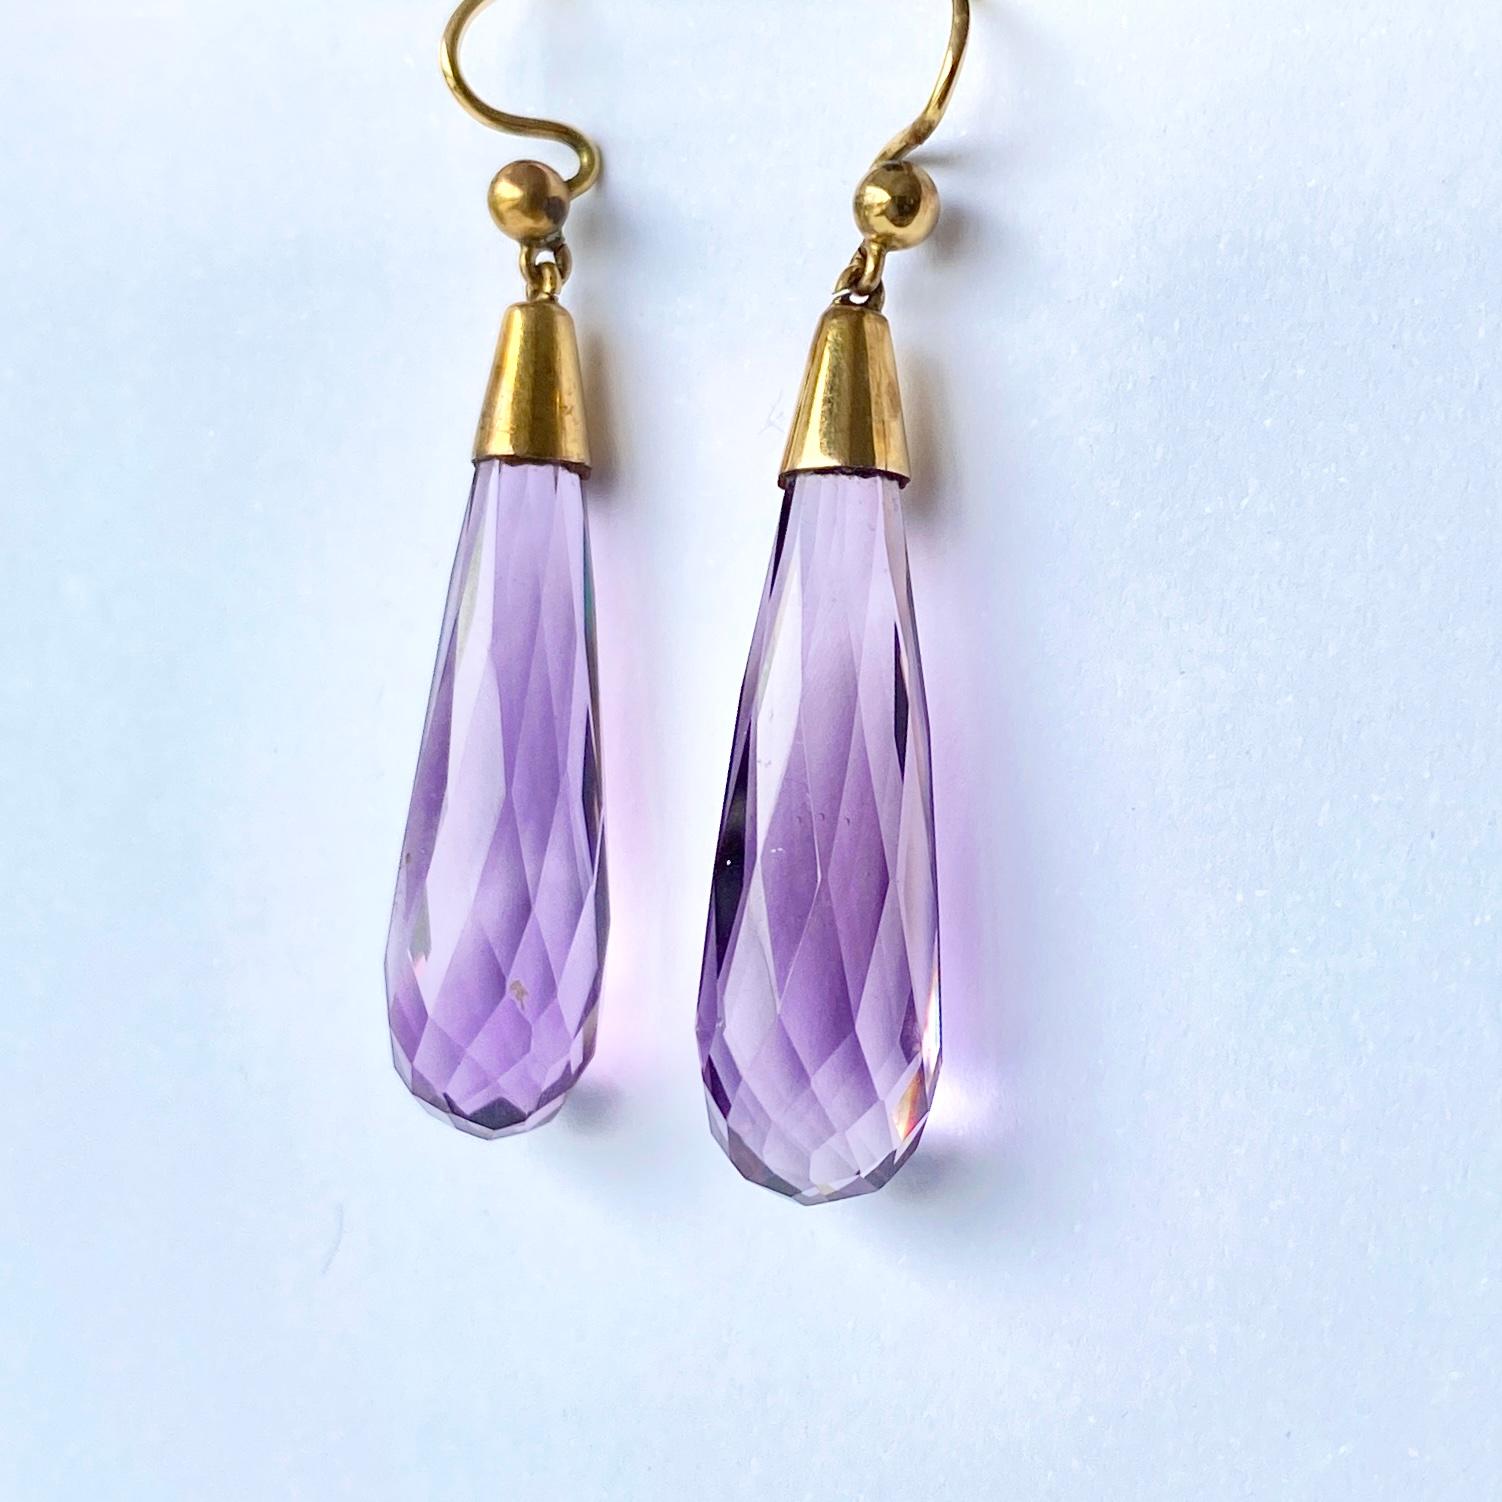 Striking Amethyst drop earrings cut beautifully to reflect the light. These earrings are modelled in 9ct gold. 

Total drop from ear: 45mm

Weight: 6.1g